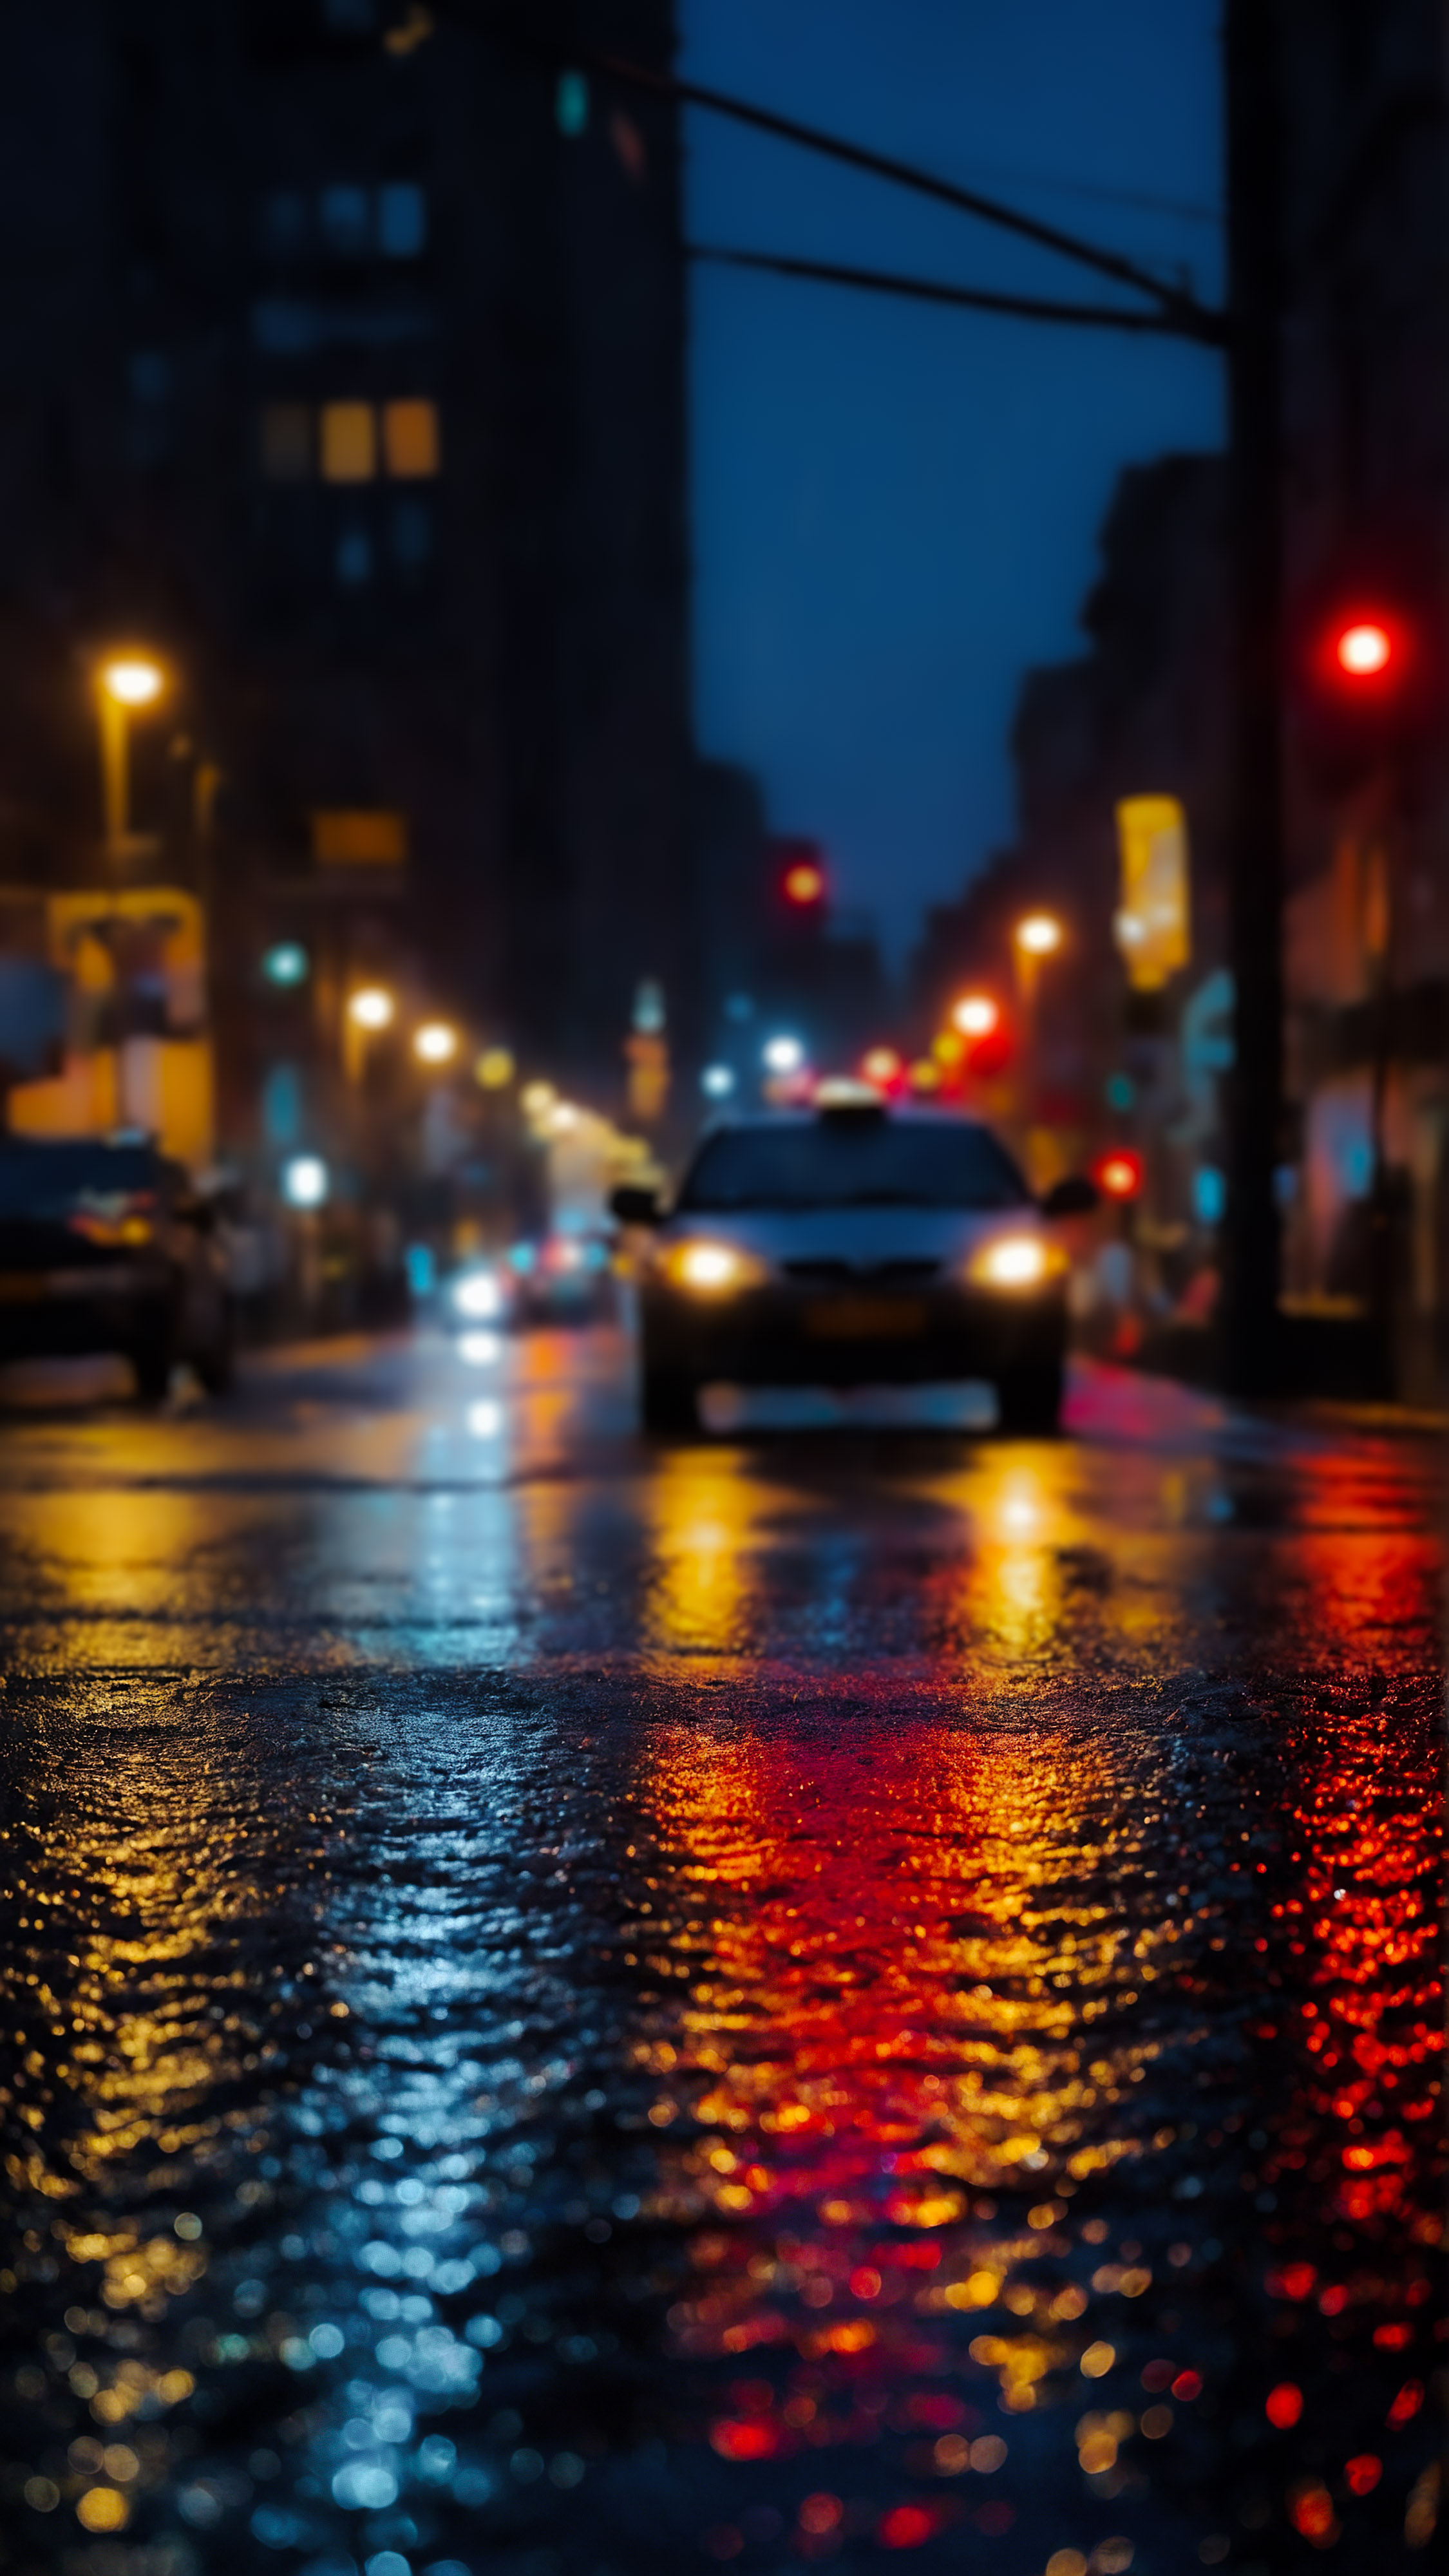 Transform your device’s look with our 4K city wallpaper for iPhone, capturing a night scene where a wet street comes alive with the colorful glow of streetlights and traffic lights, their red and blue reflections creating a striking contrast on the glistening road surface.